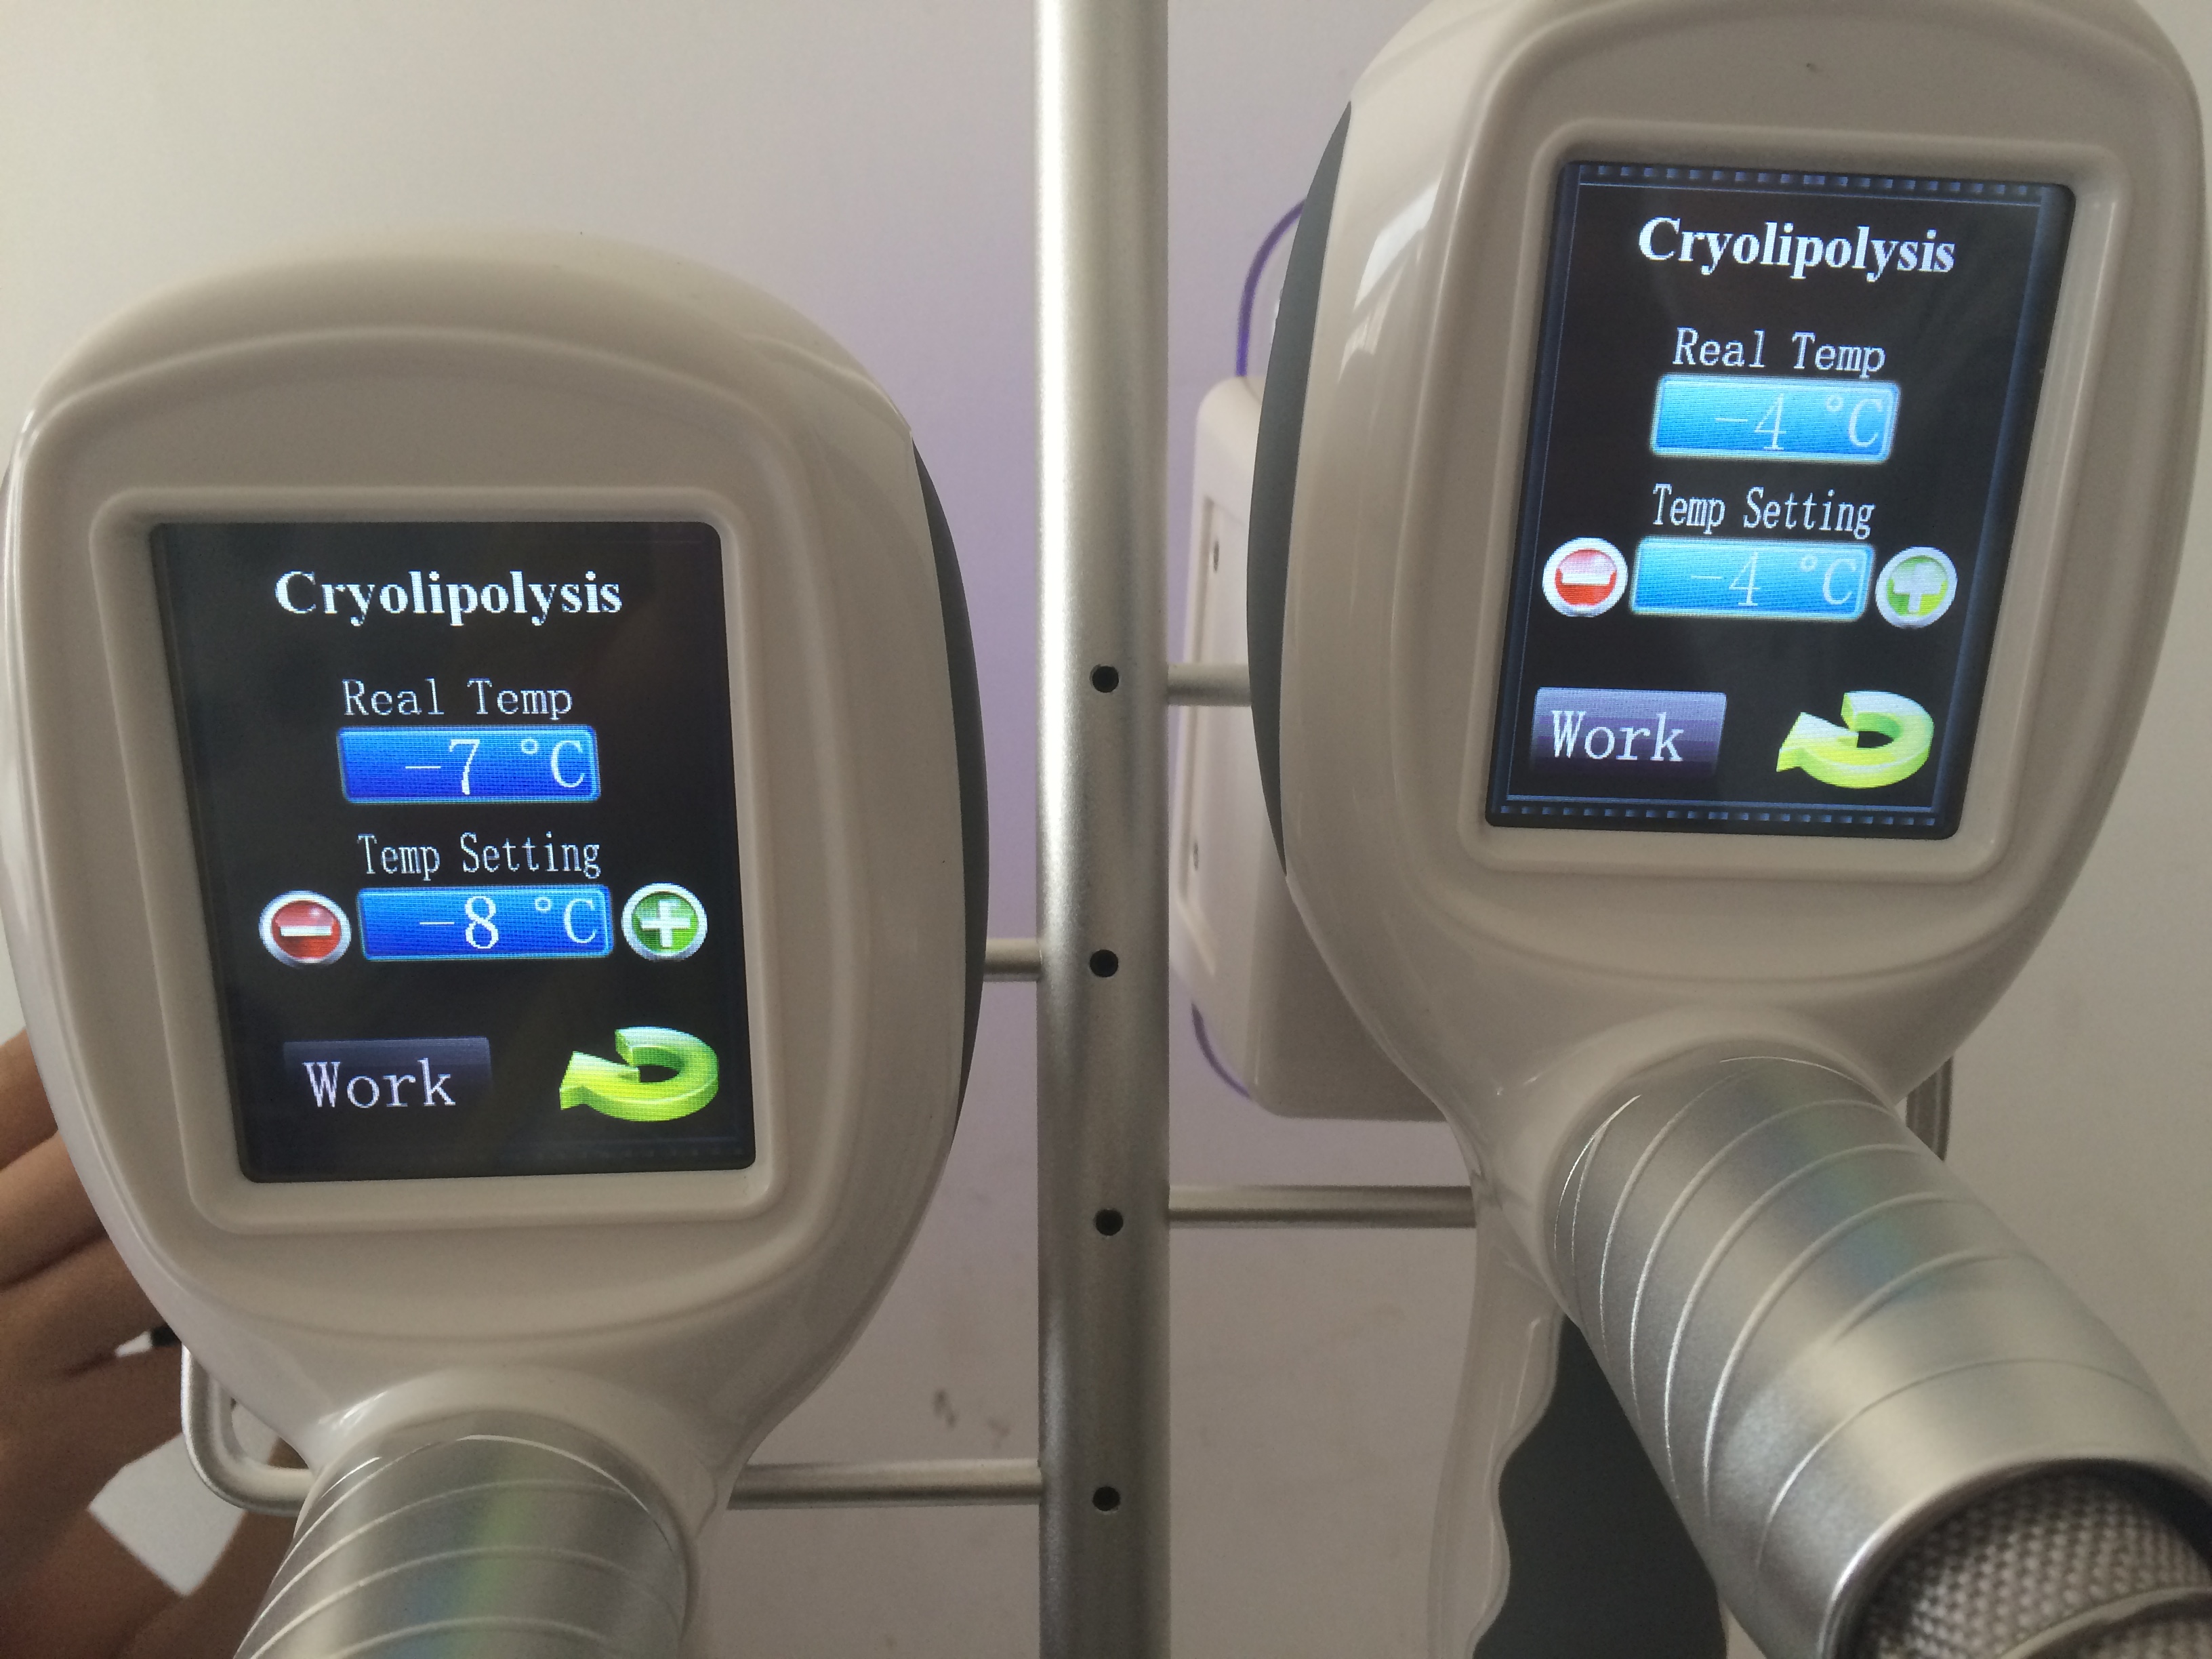 Cryo Fat Dissolved Weight Loss Coolsculpting Cryolipolysis Machine